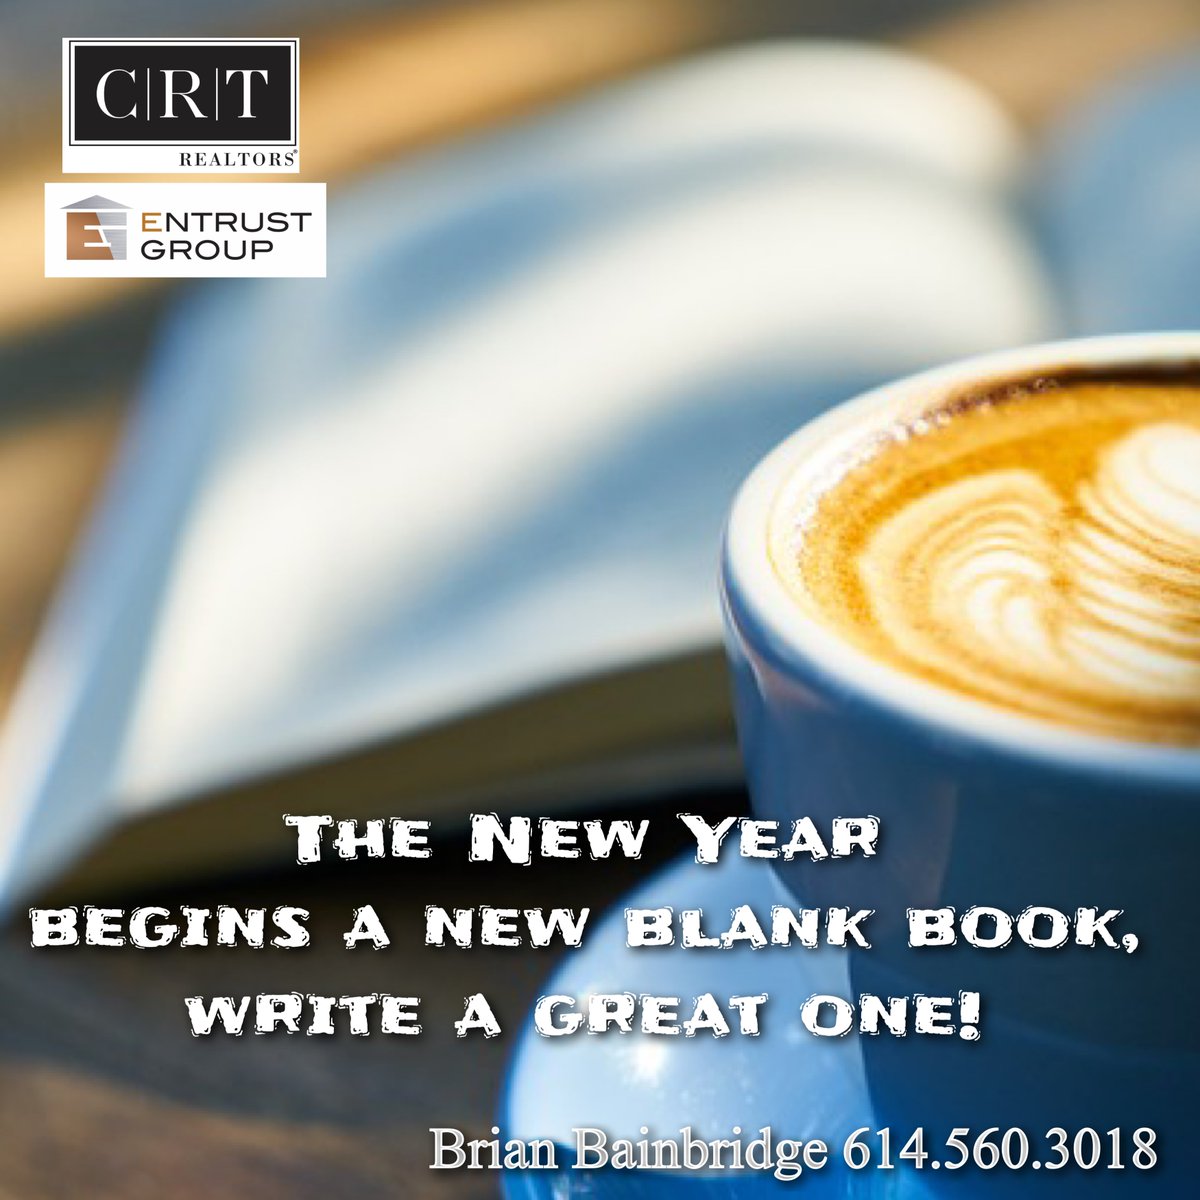 You are the author of your next chapter. Whether it’s making a goal to be healthier, spend more time with family, or start a business - begin with the end in mind and by taking time to meditate how you want the year to end up!
#HappyNewYear #GreatBeginnings #WriteYourOwnStory